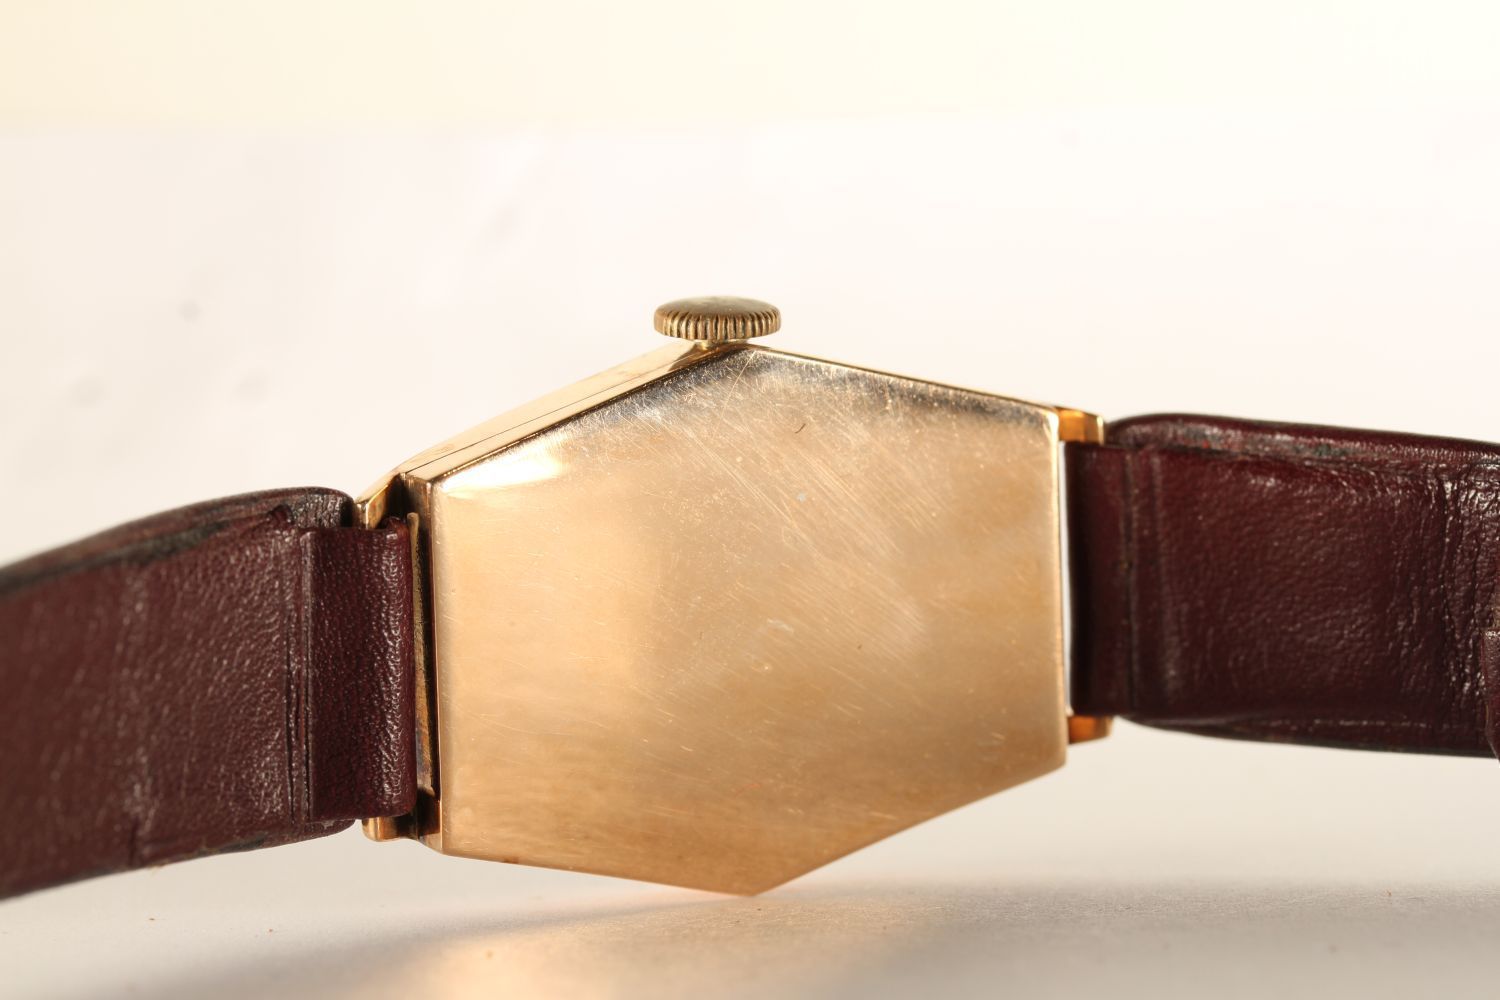 GENTLEMENS OMEGA OVERSIZE WRISTWATCH CIRCA 1920/30s, hexagonal aged dial with arabic numbers and - Image 4 of 4